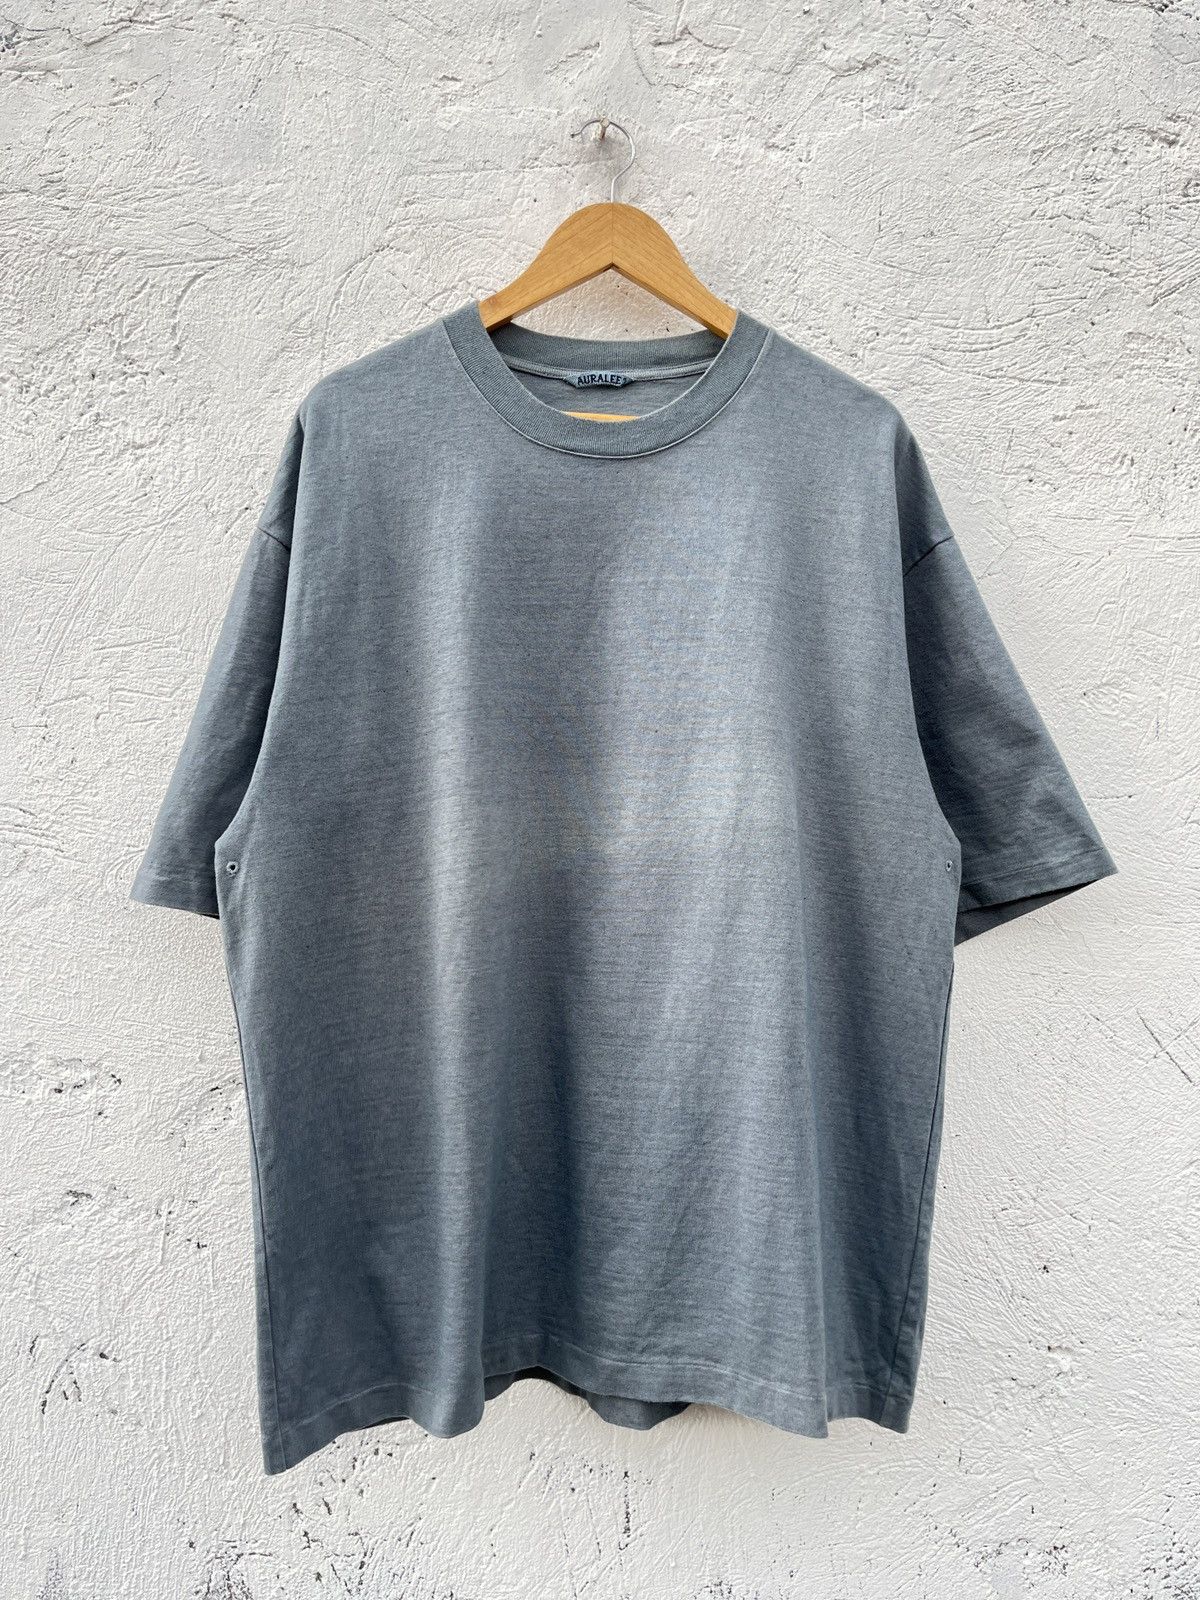 Auralee SS21 Exclusive Stand Up Shirt | Grailed